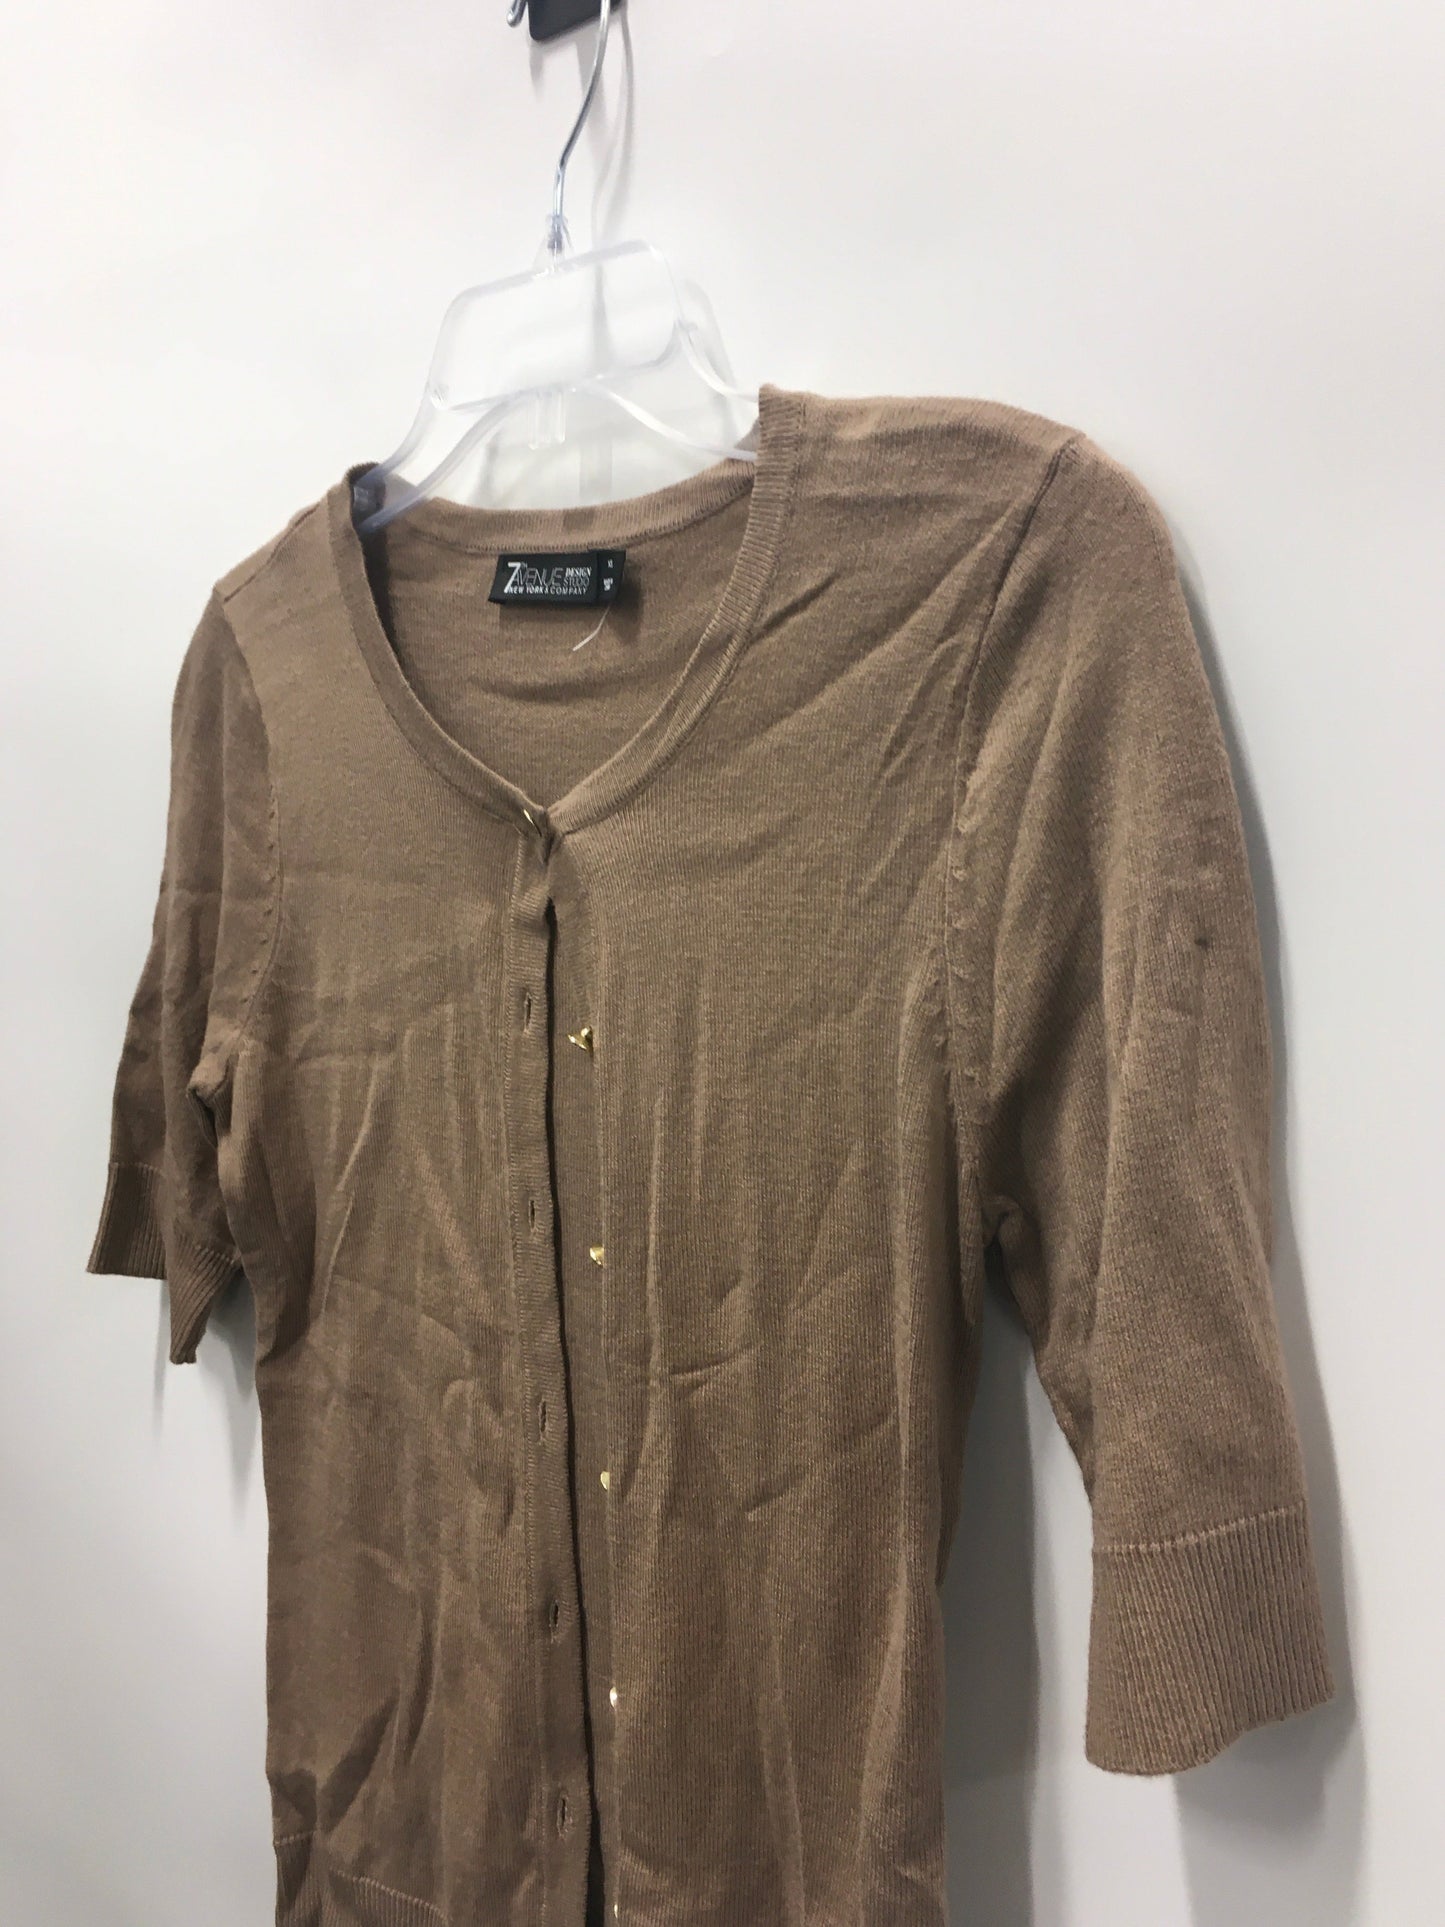 Brown Cardigan New York And Co, Size Xs